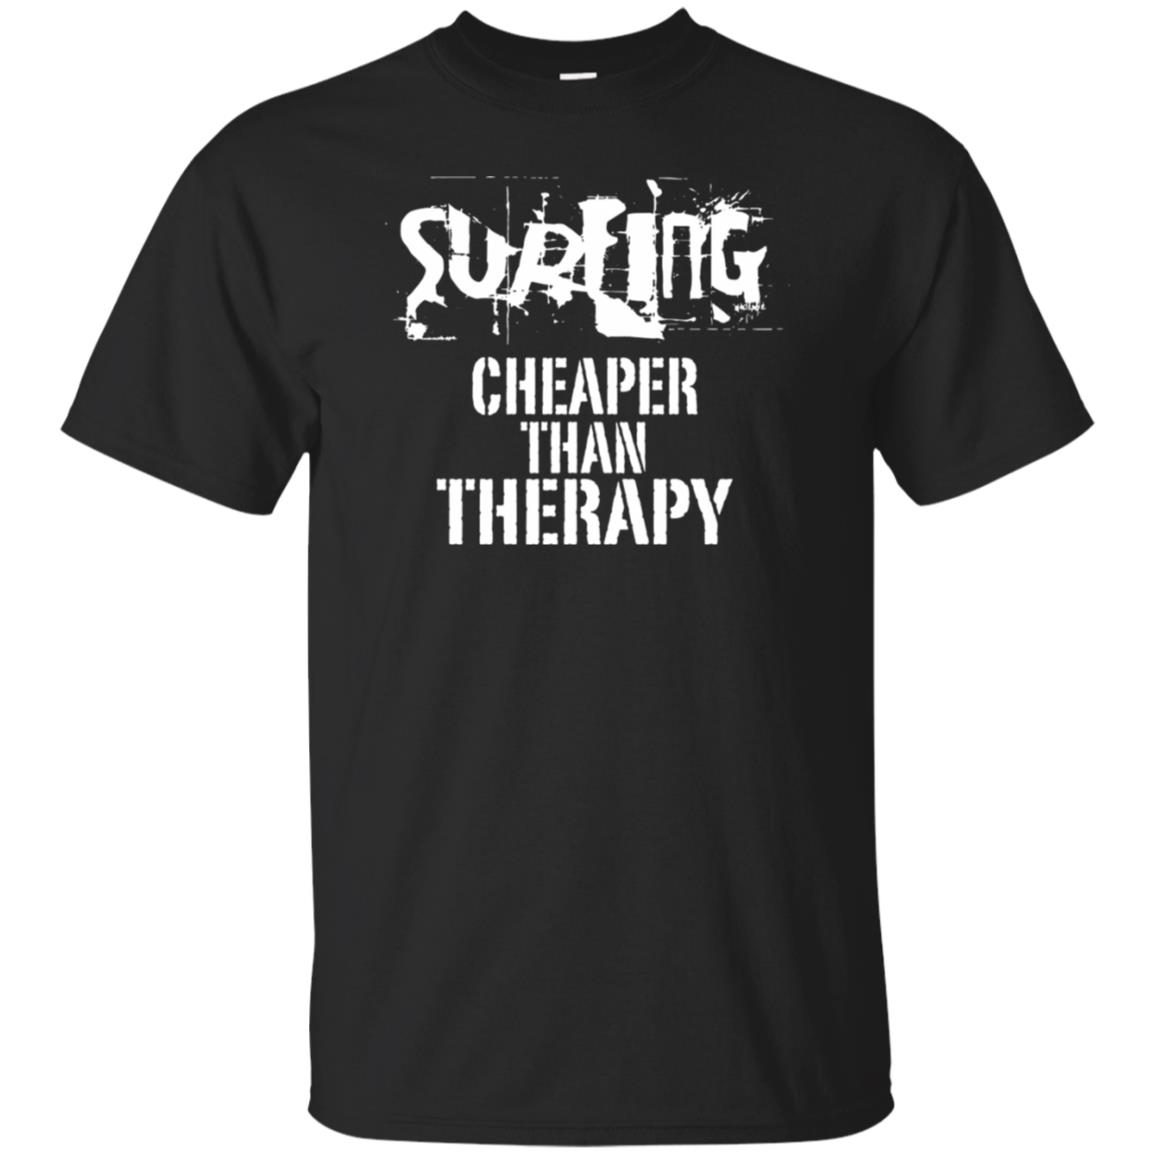 Surfing, Cheaper Than Therapy Shirt 10